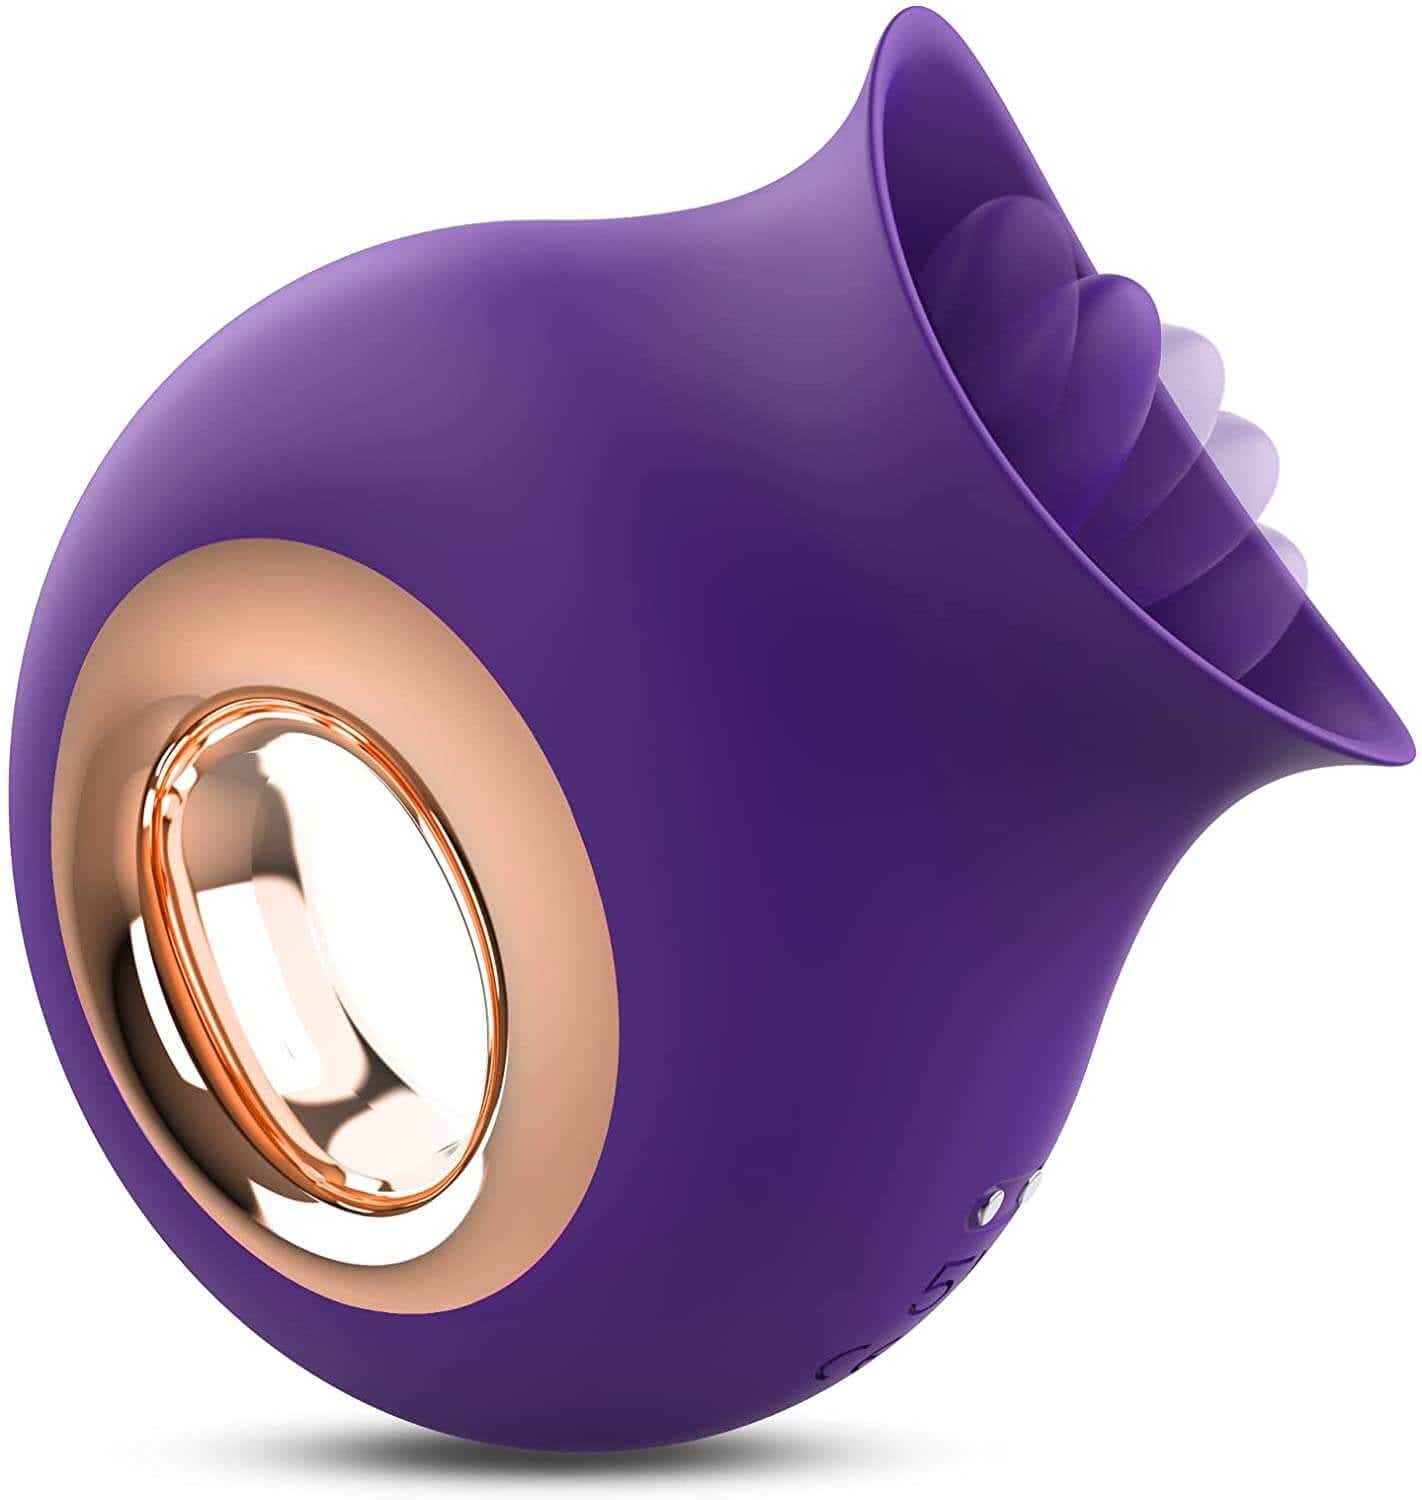 phanxy rose vibrator in purple color